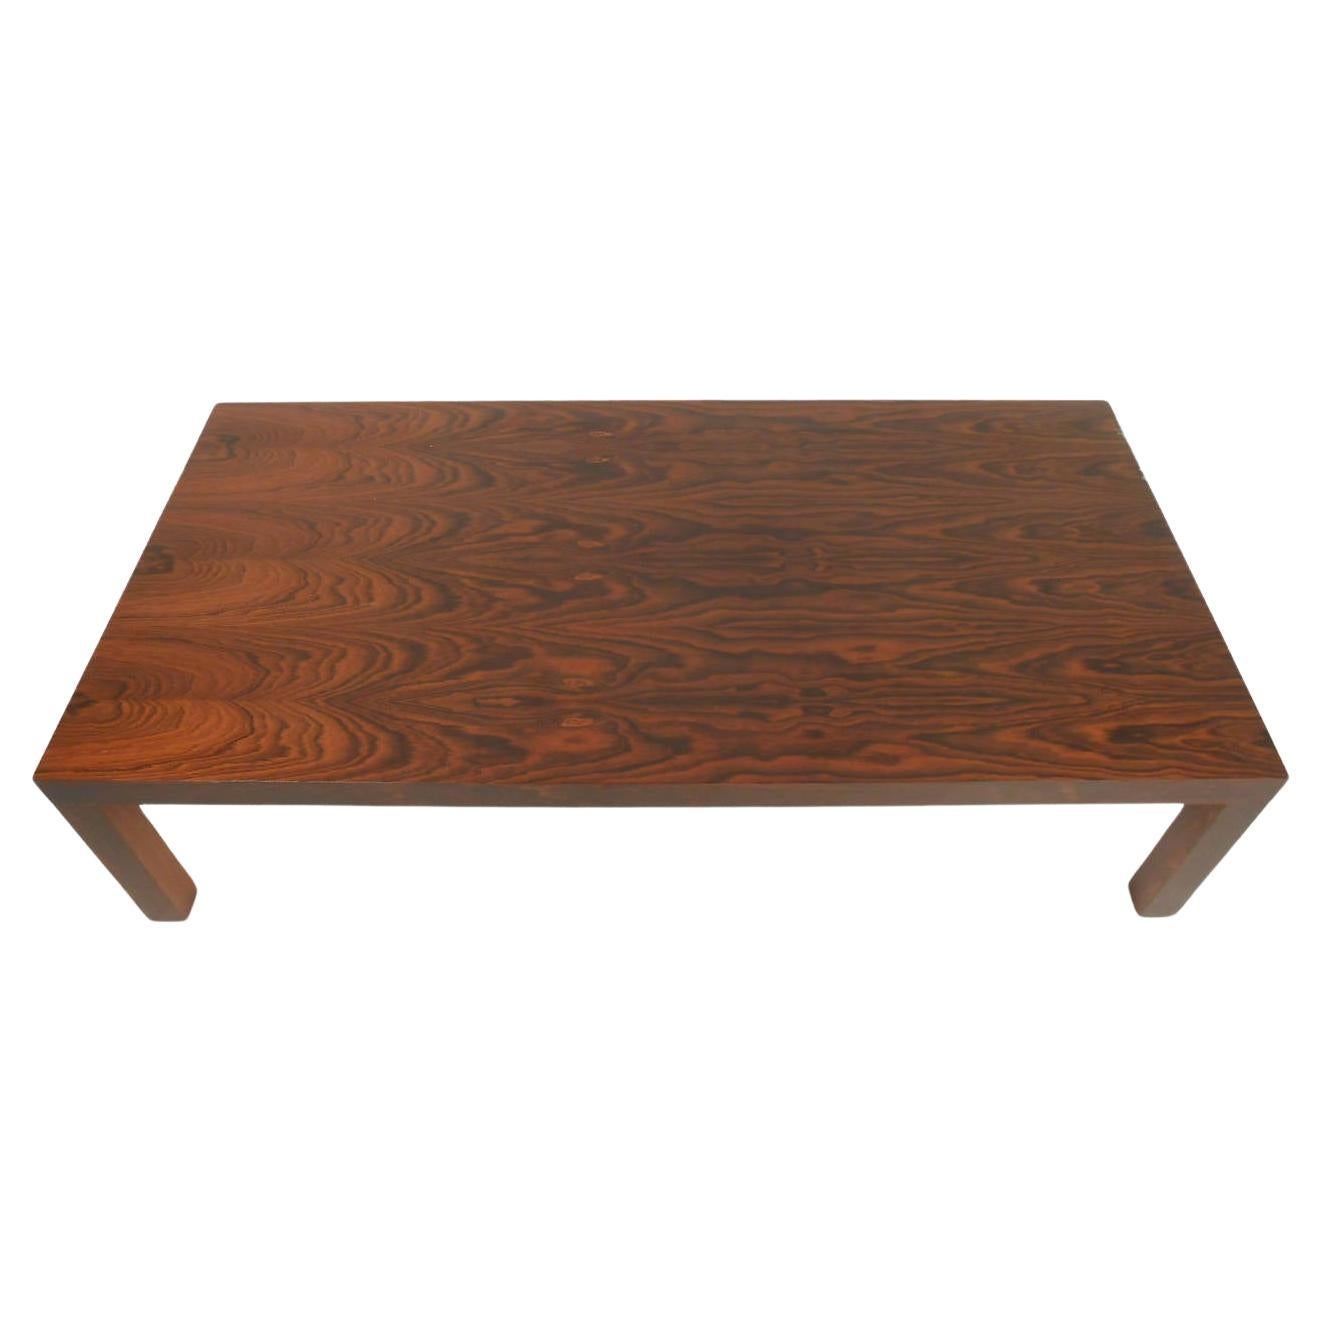 Scandinavian Modern Rosewood Coffee Table by Centrum Mobler For Sale